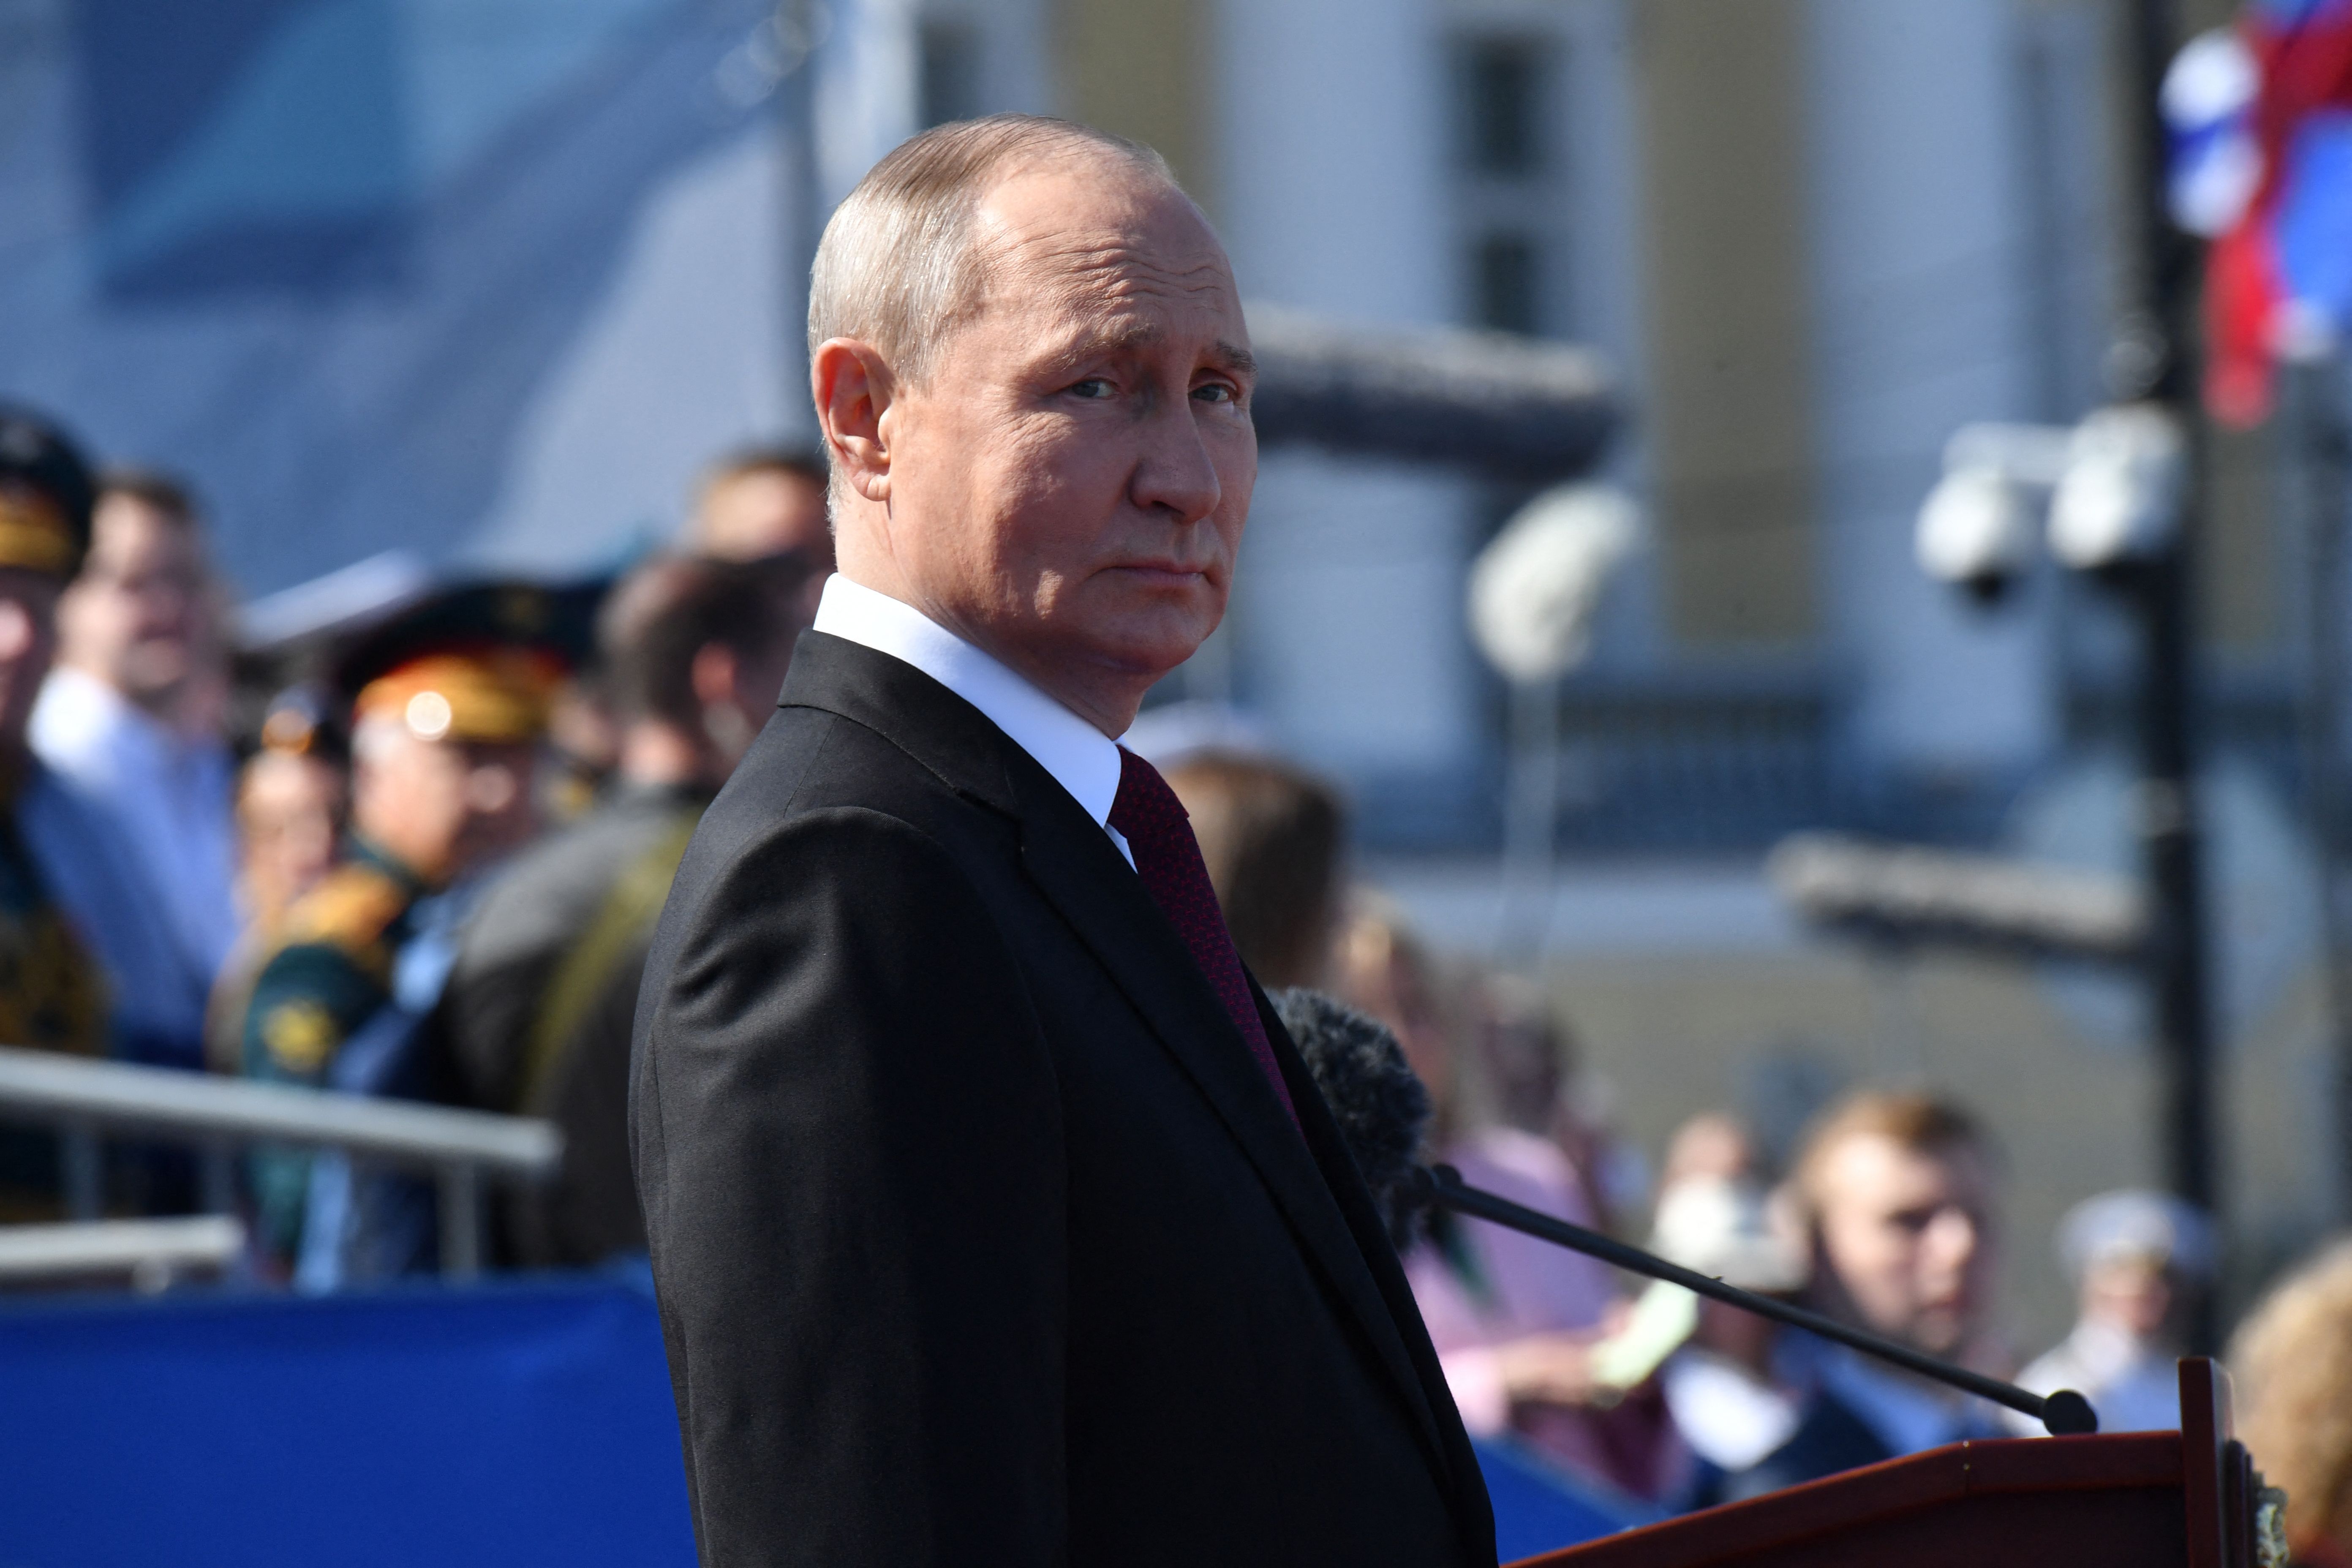 Putin was caught off guard as he attended an annual Navy day